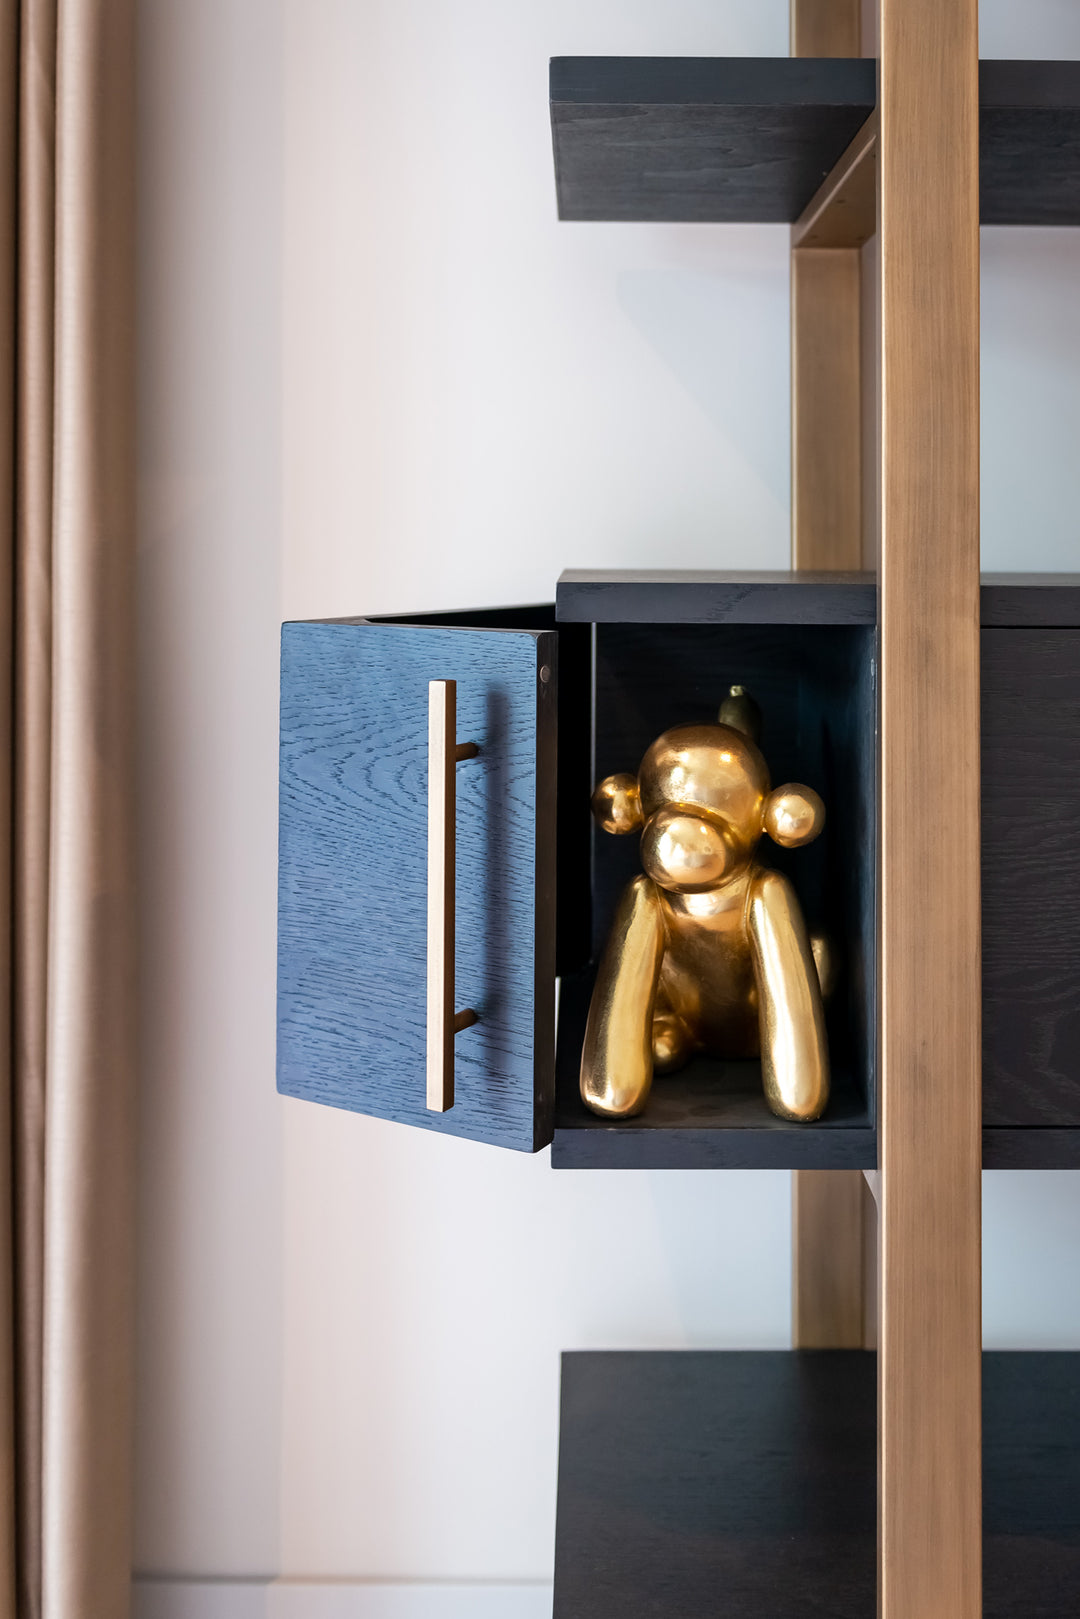 Cambon Gold Stainless Steel Bookcase with Dark Coffee 4 Door Cabinet by Richmond Interiors